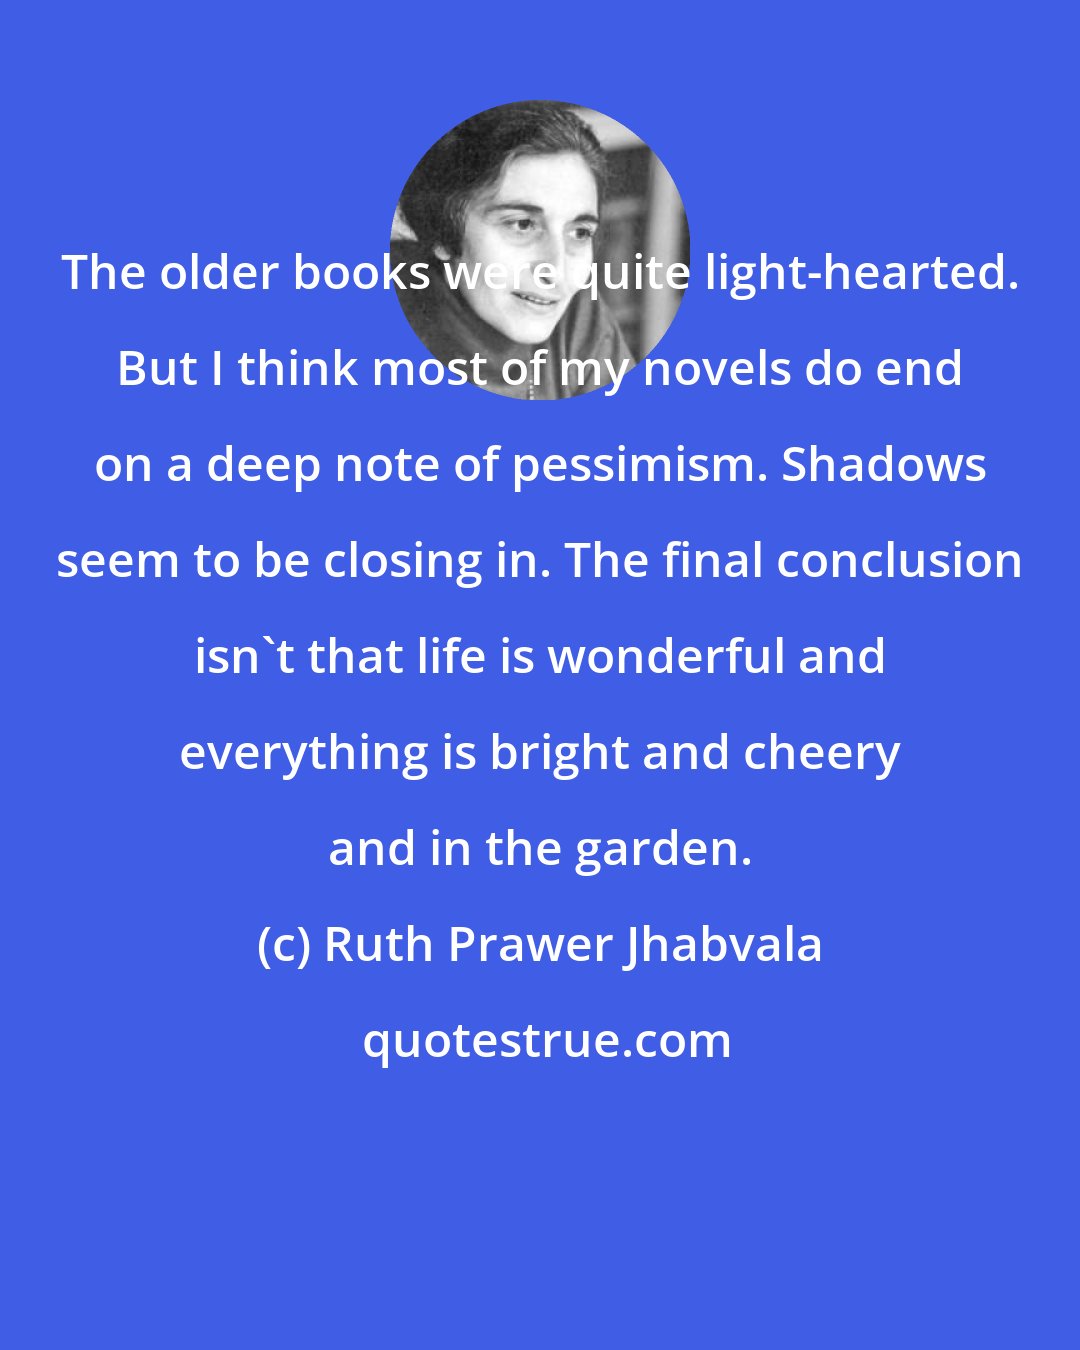 Ruth Prawer Jhabvala: The older books were quite light-hearted. But I think most of my novels do end on a deep note of pessimism. Shadows seem to be closing in. The final conclusion isn't that life is wonderful and everything is bright and cheery and in the garden.